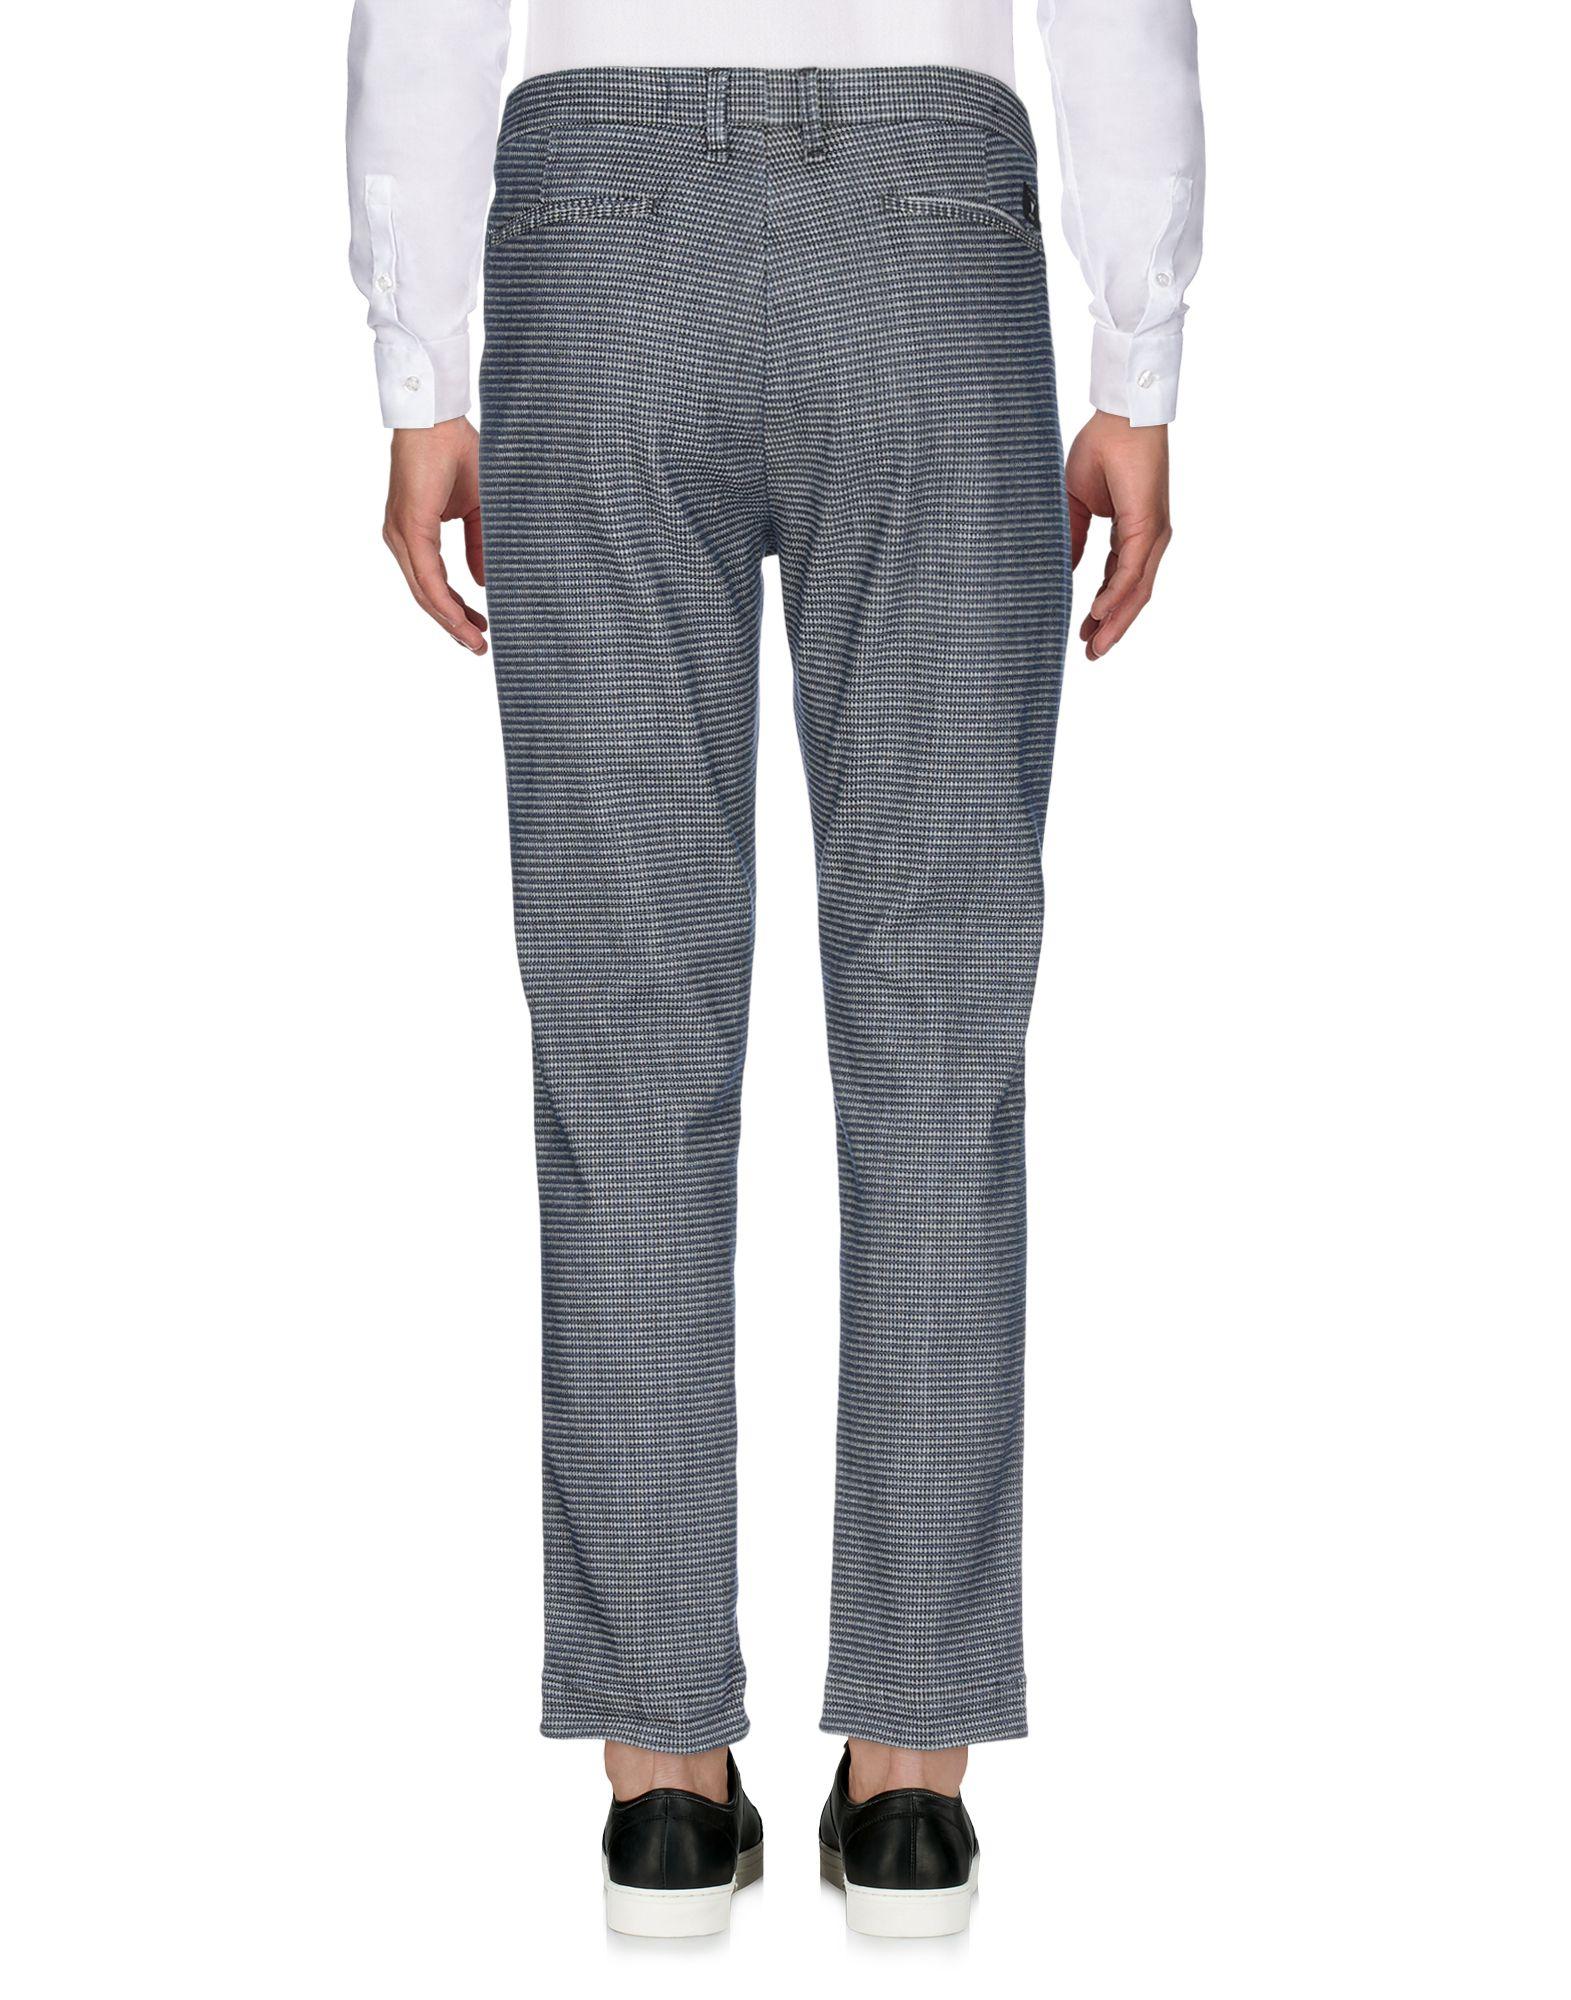 Guess Cotton Casual Pants in Blue for Men - Lyst